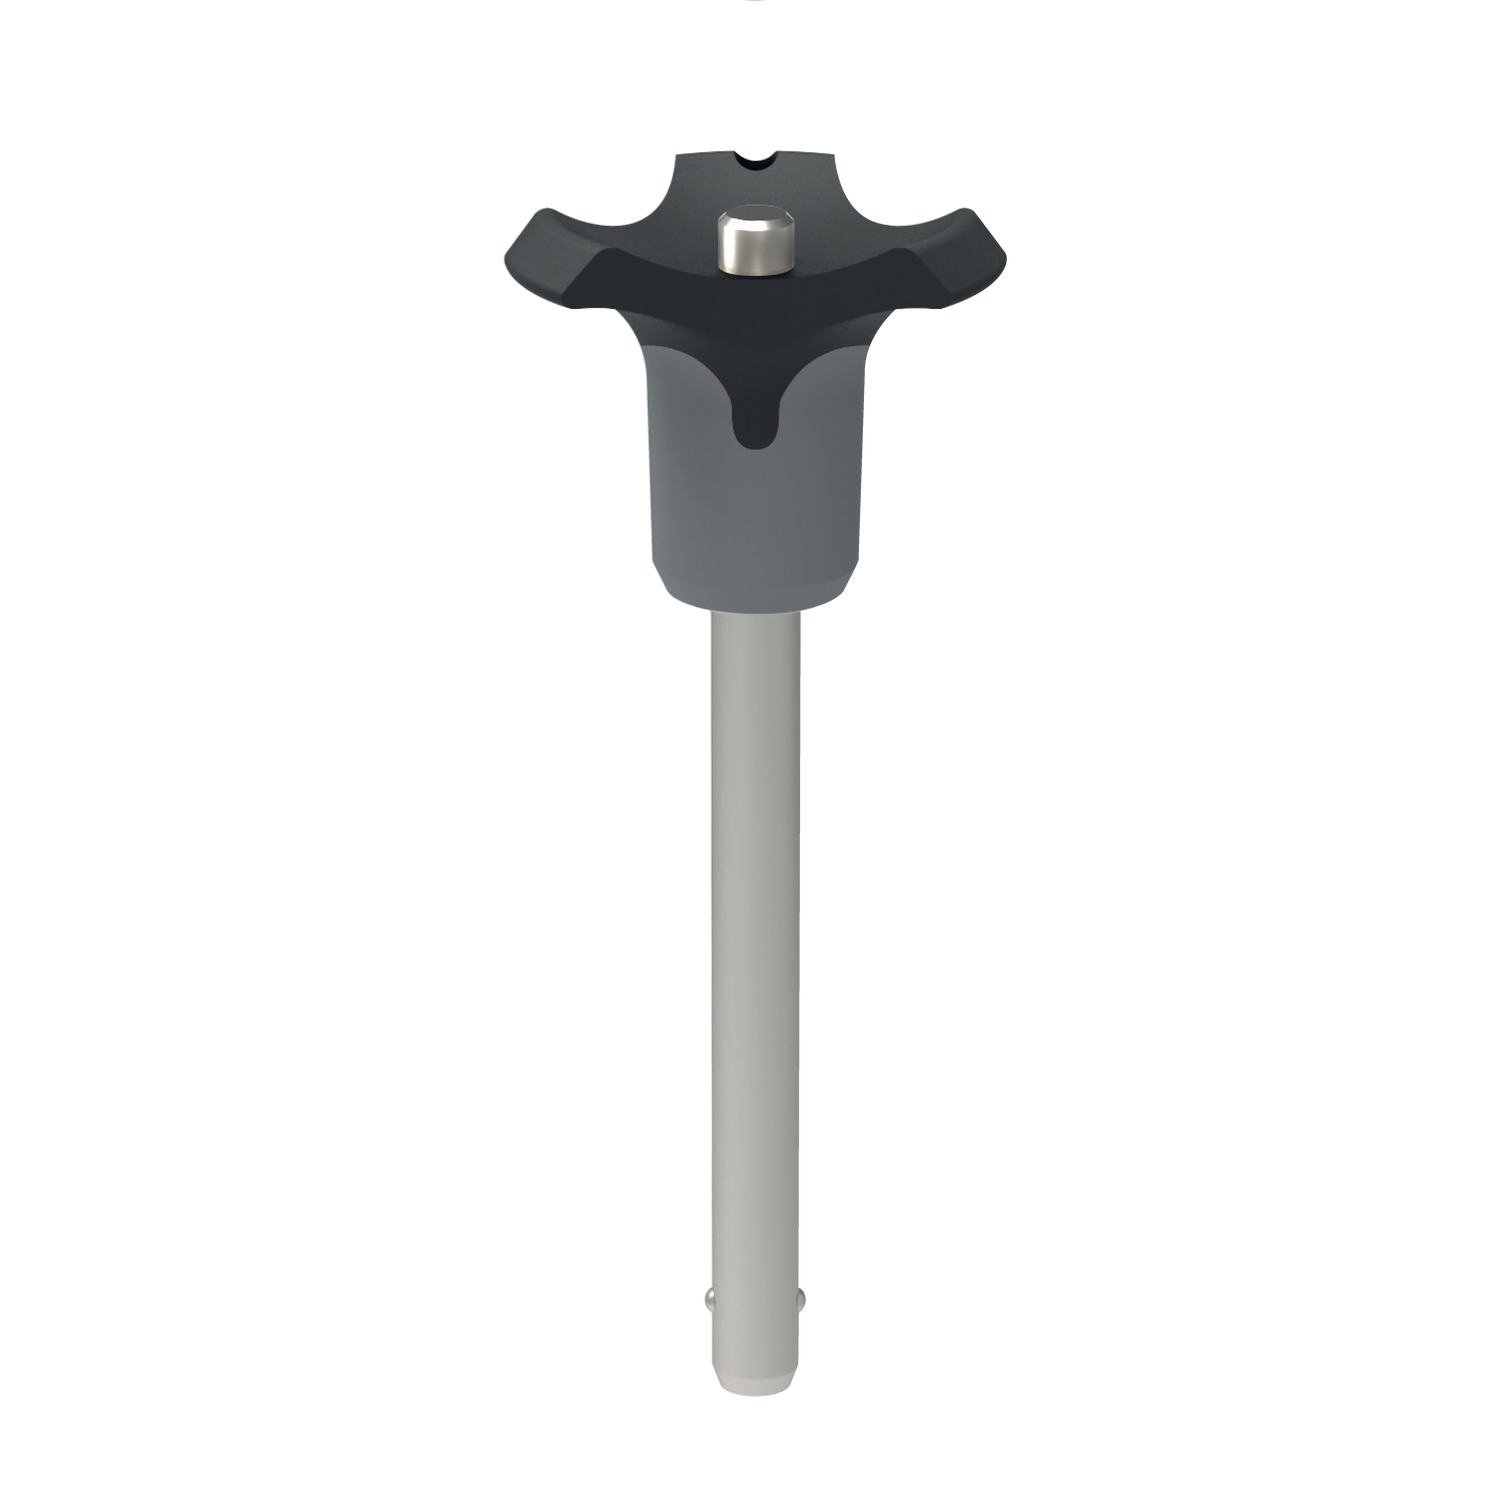 Ball Lock Pins - Single Acting - Grey Plastic Handle Single Acting Plastic Handle Ball Lock Pins in four different colours (orange, blue, grey and black) to co-ordinate with your required application colour scheme. For repeated connection of parts, with high sheer forces.